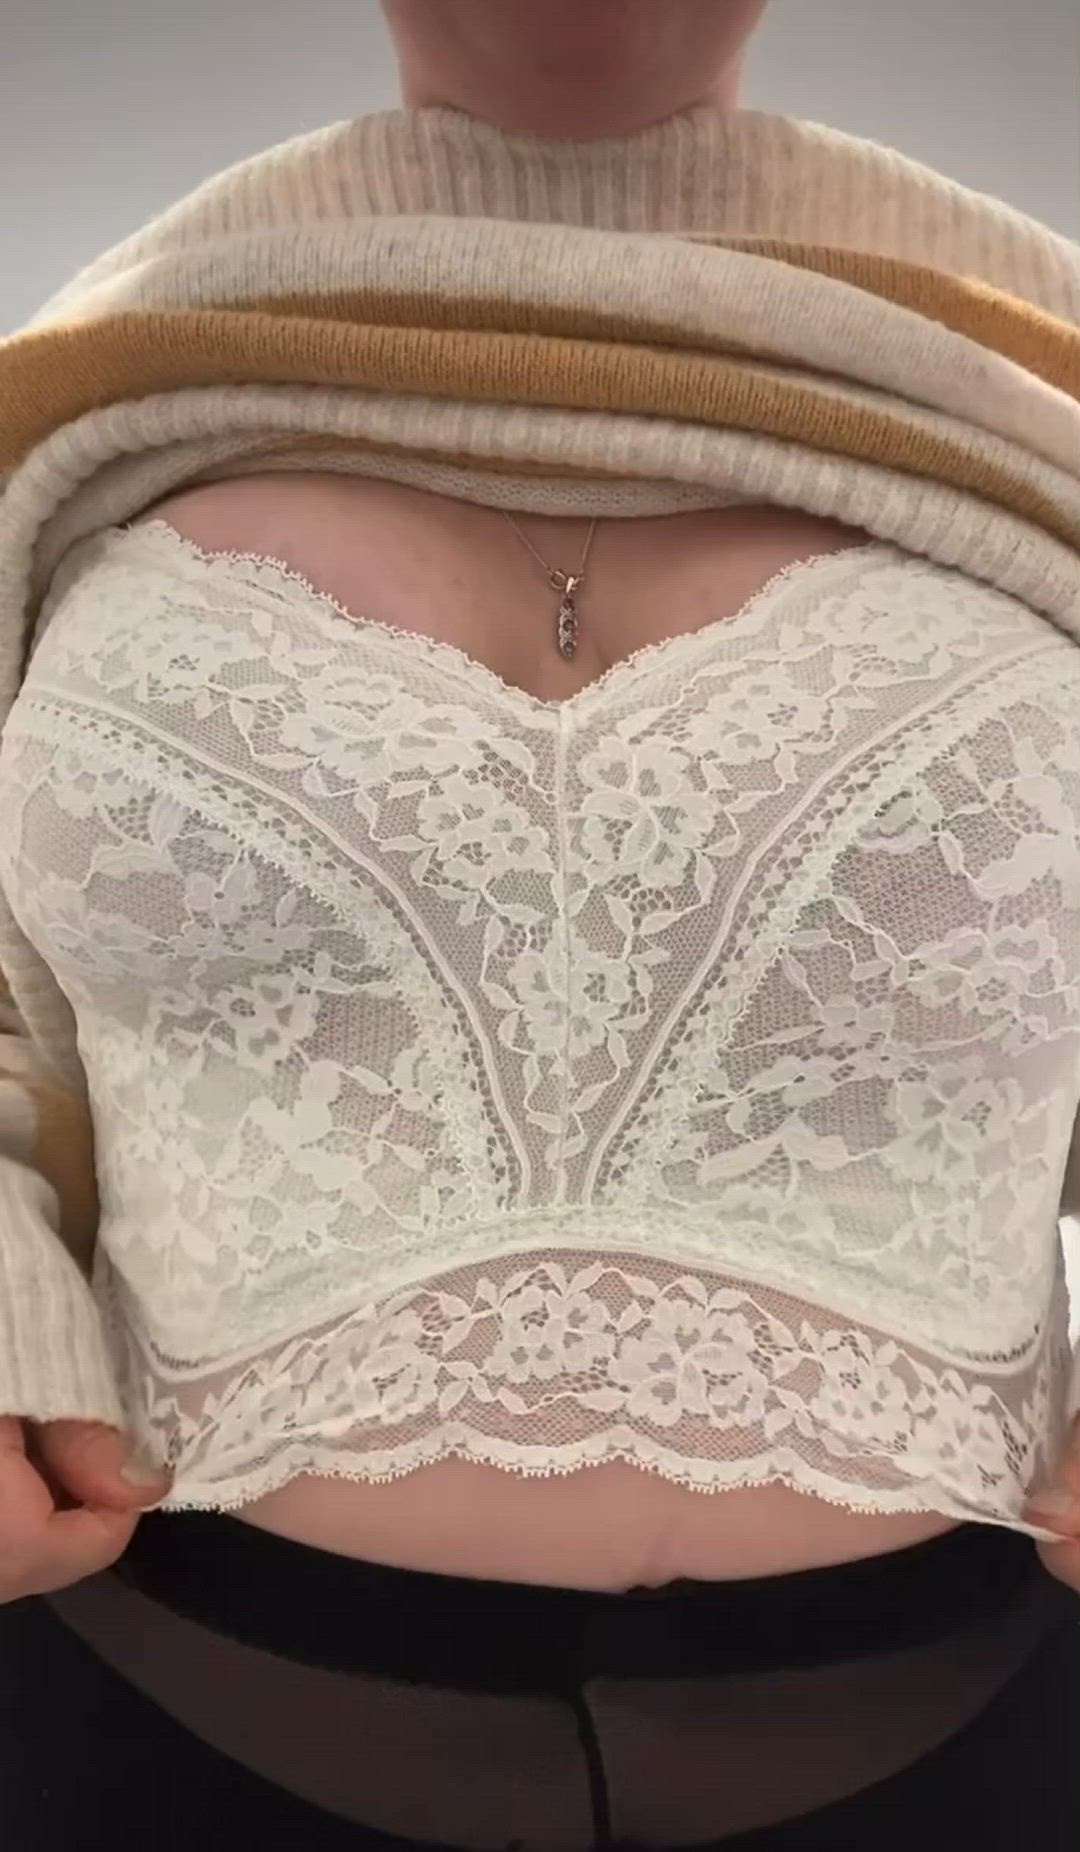 Big Tits porn video with onlyfans model maisiebluex <strong>@blueeyedmaisie</strong>